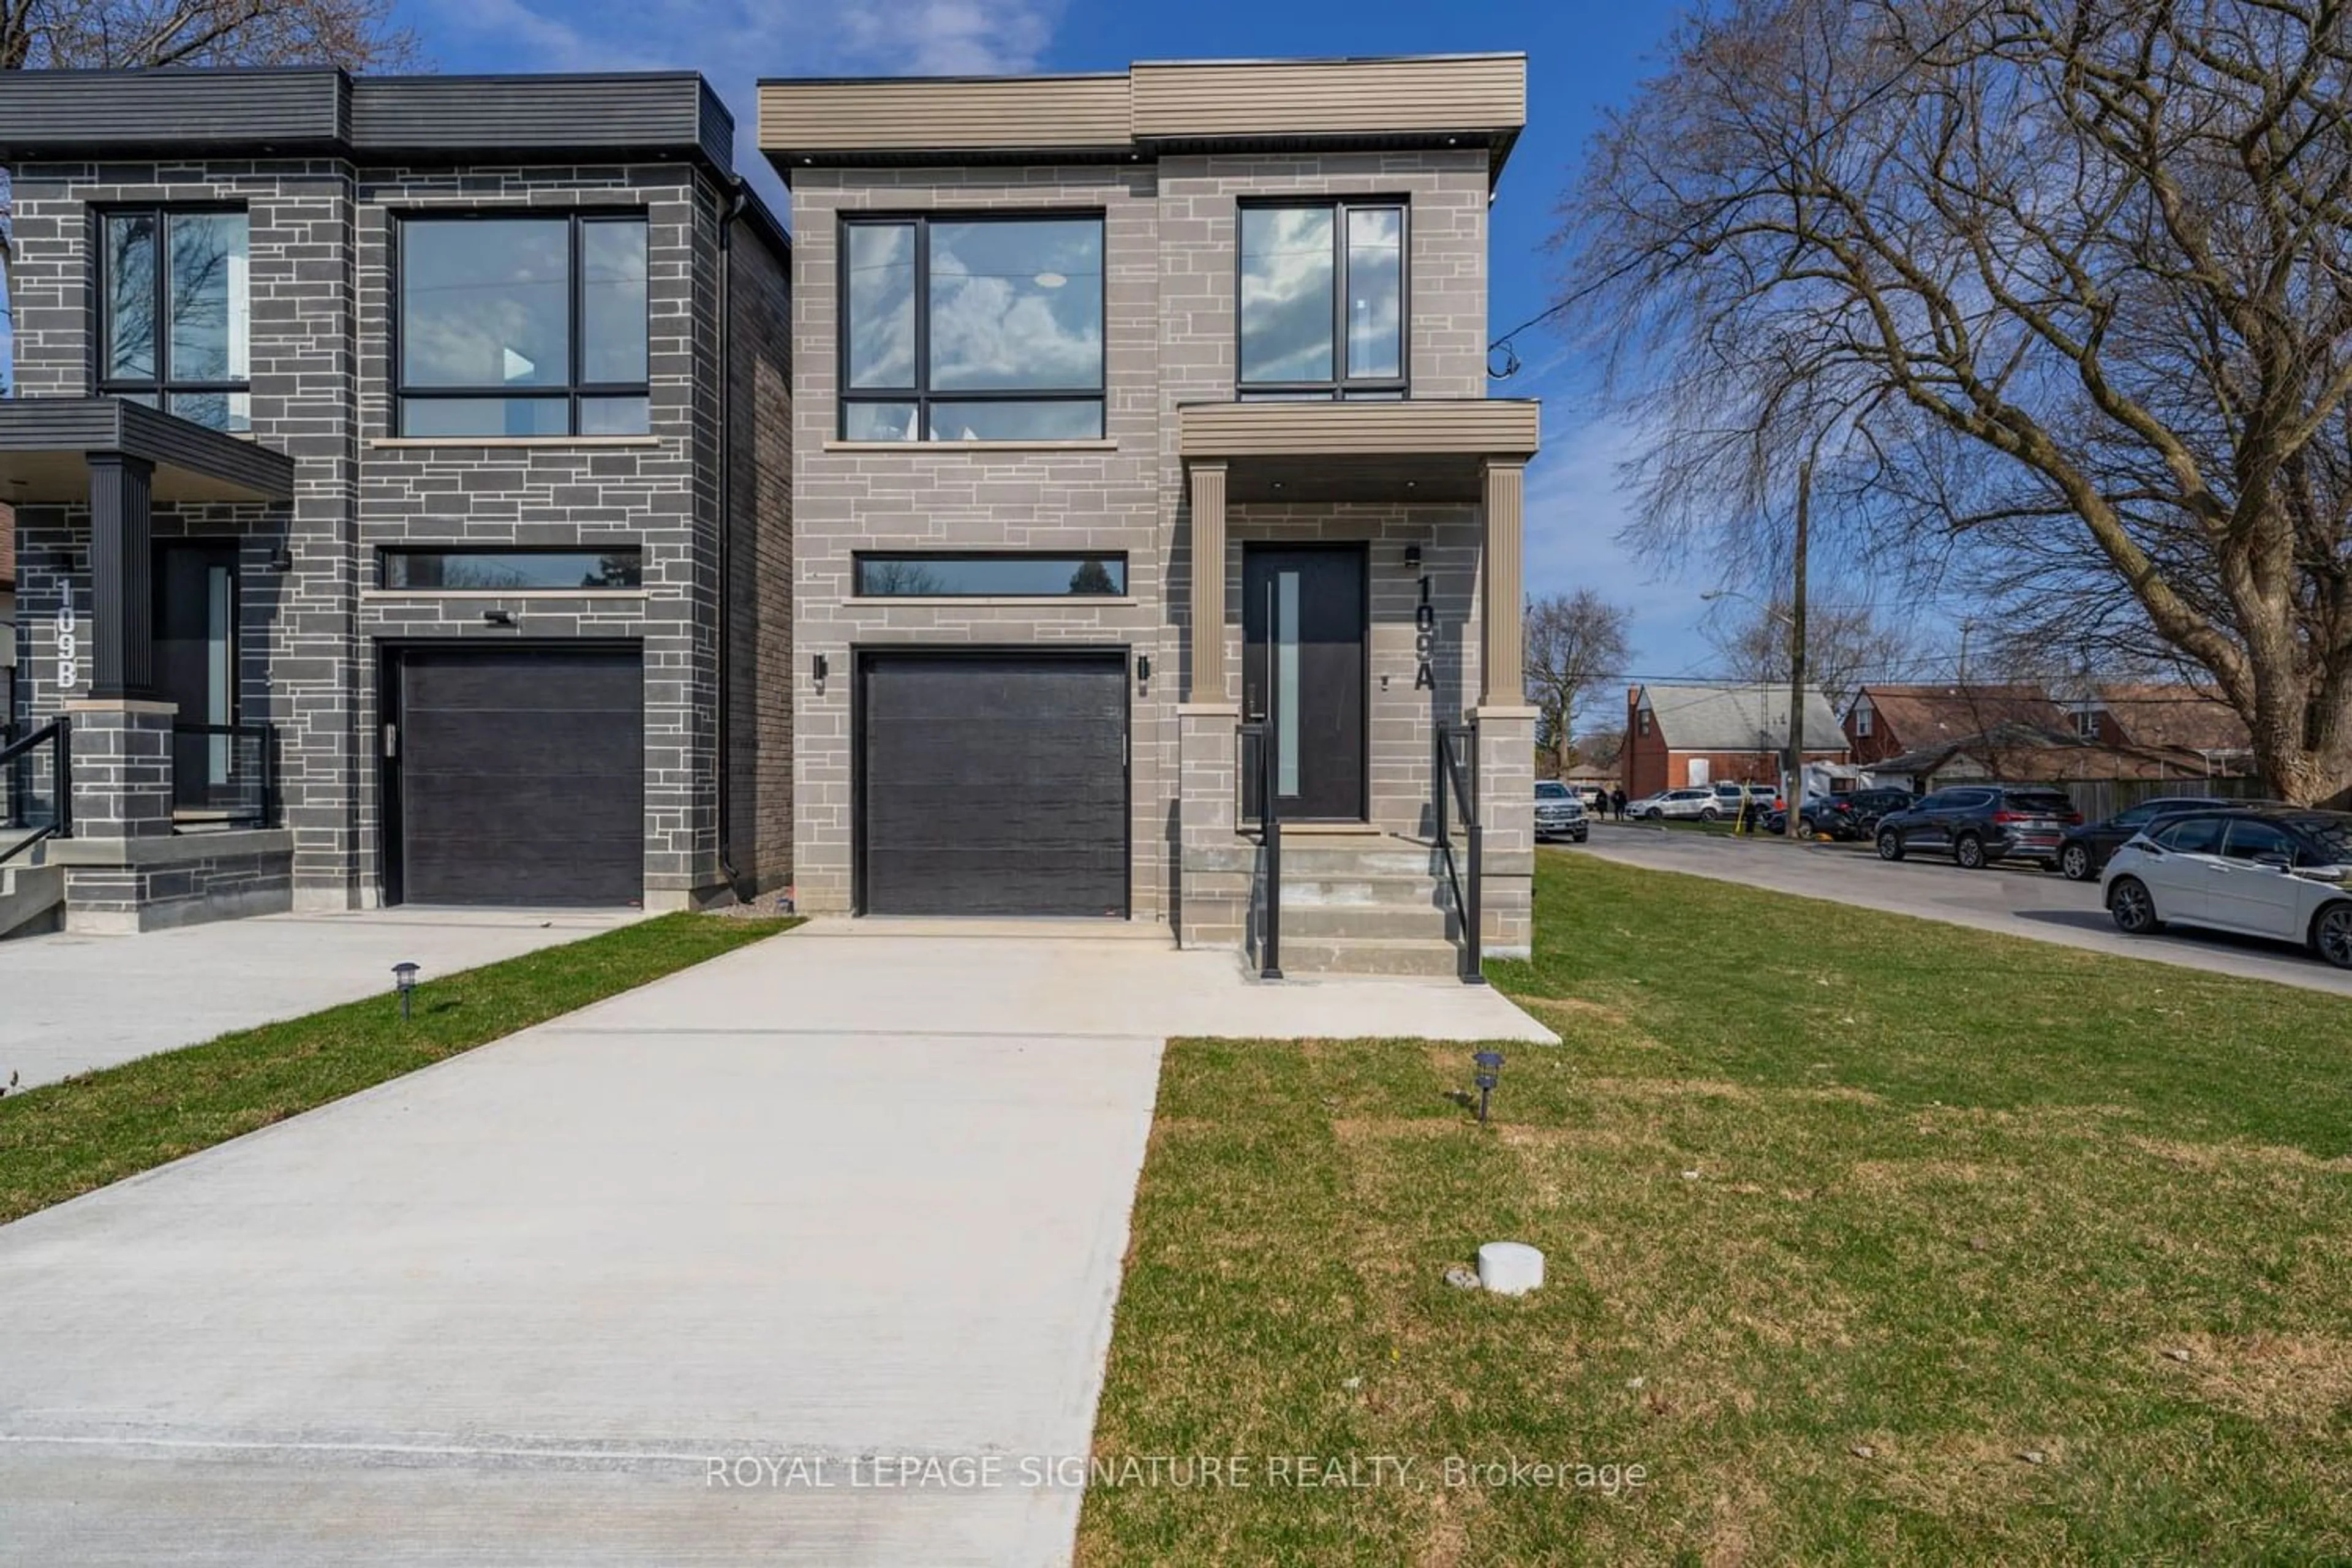 Home with brick exterior material for 109A Heale Ave, Toronto Ontario M1N 3Y2